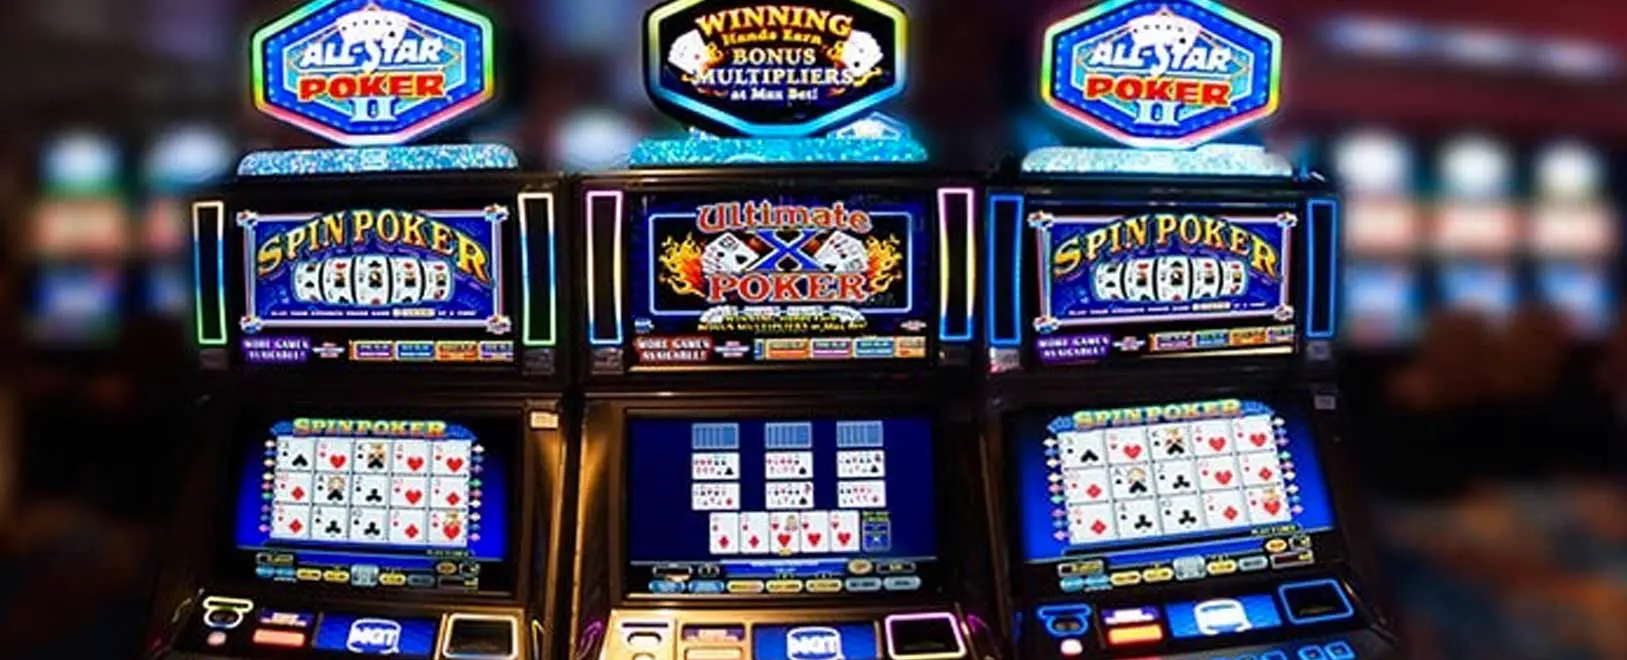 Check out these great reasons to play online video poker for real money!